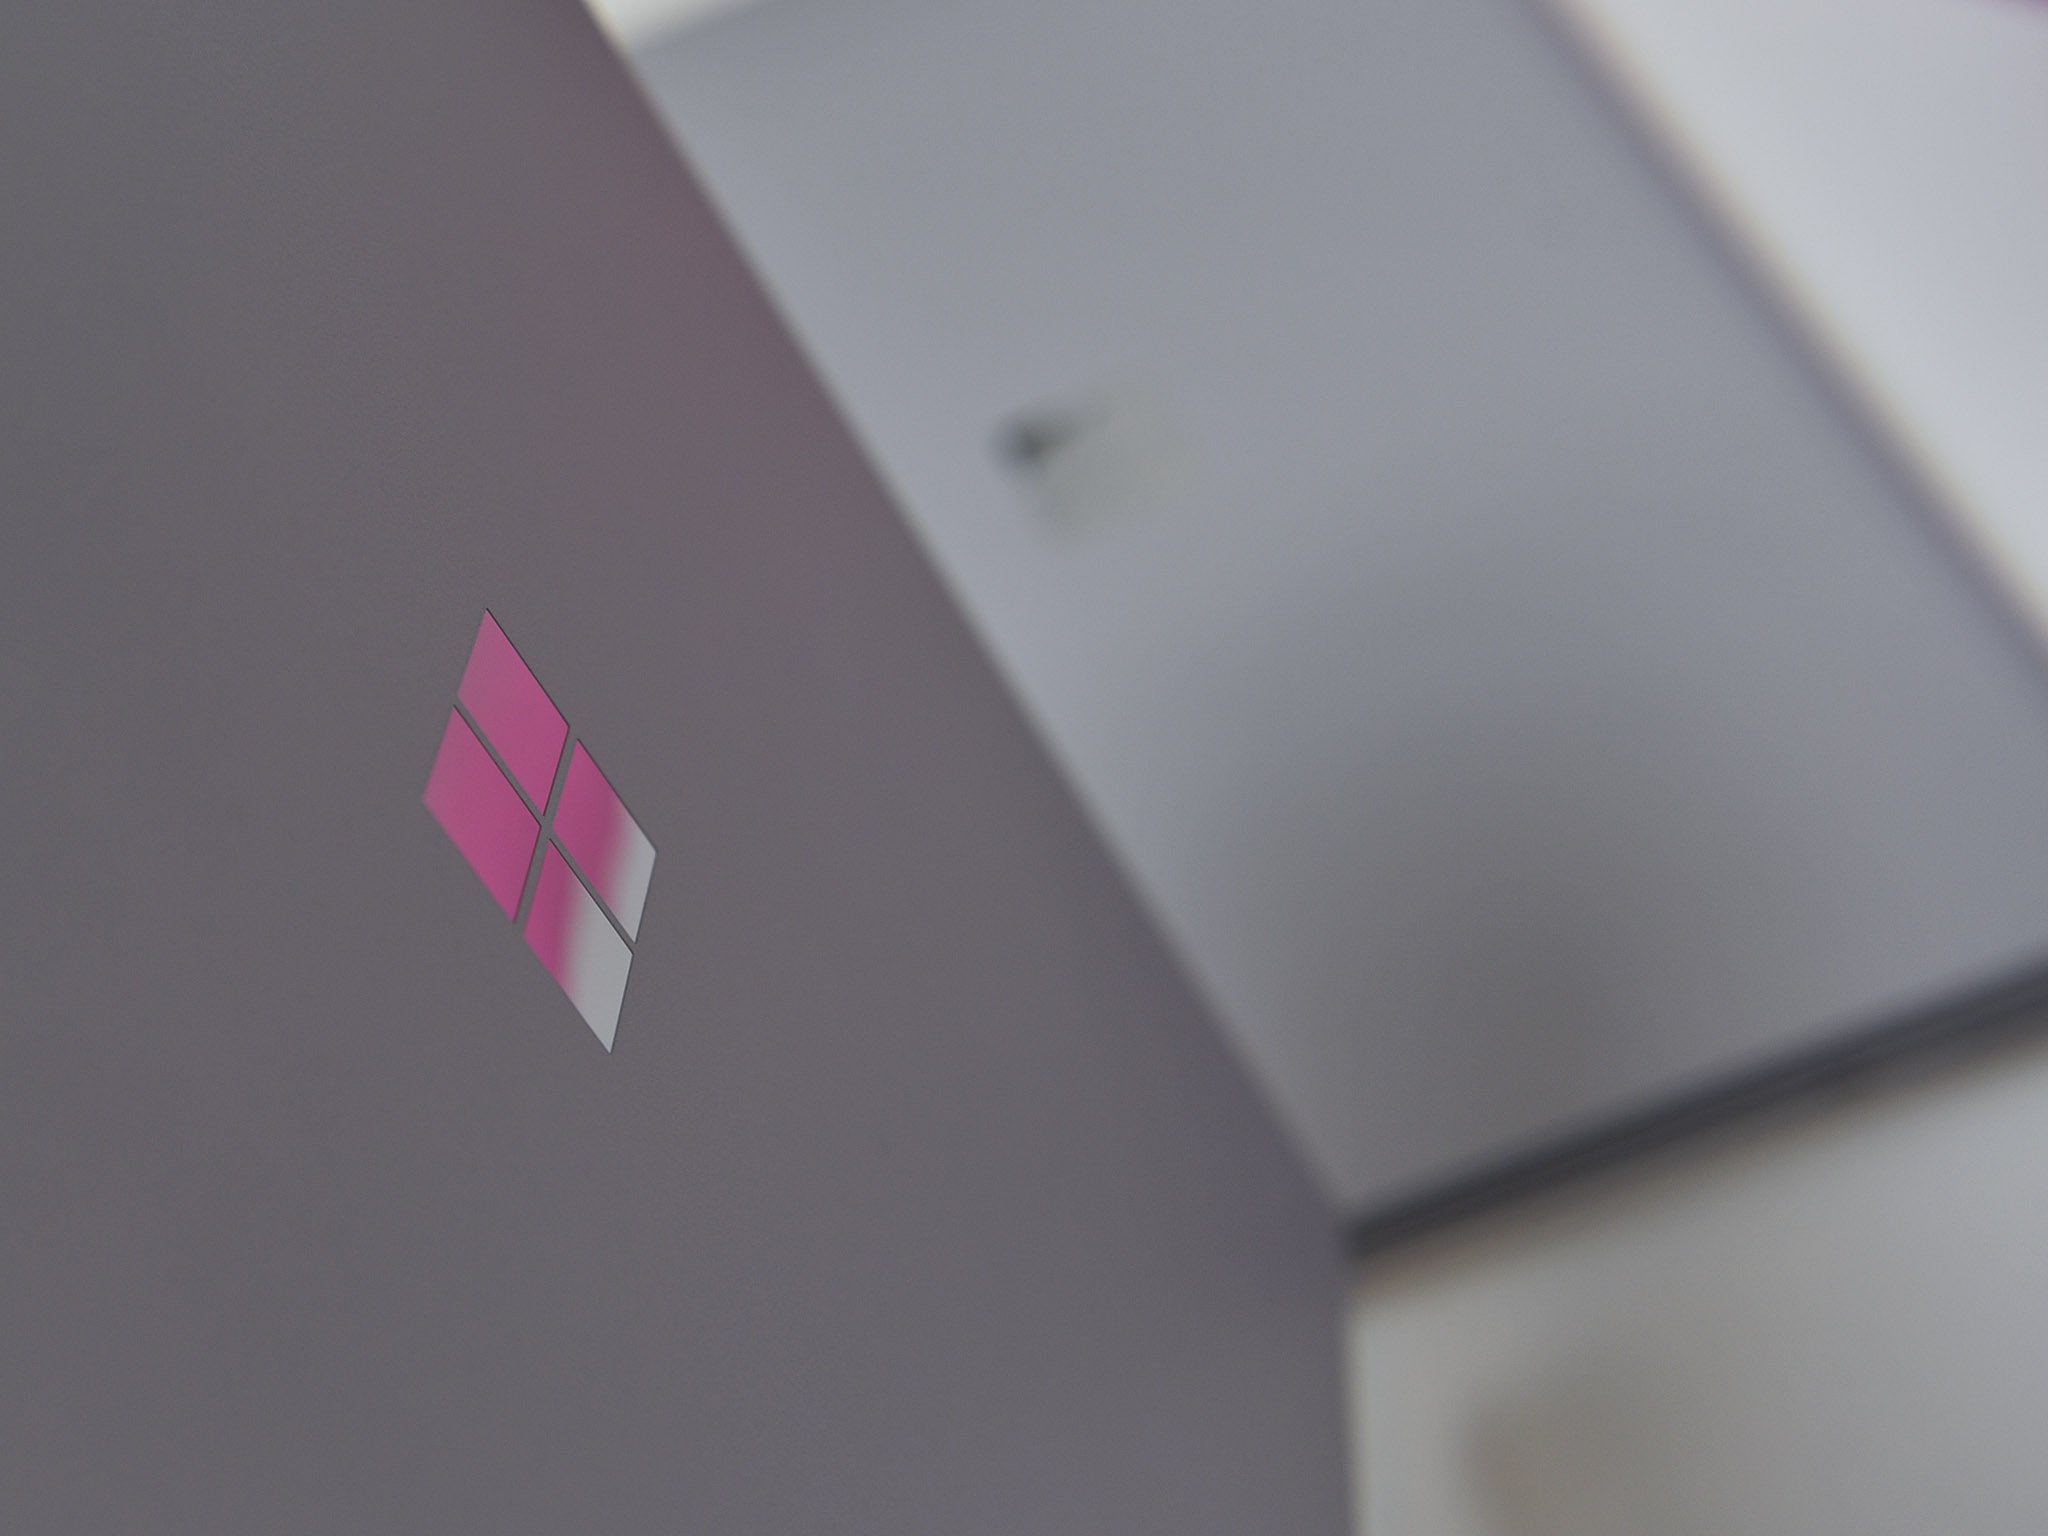 Microsoft job ad could hint at ARM-powered Surface device in the works